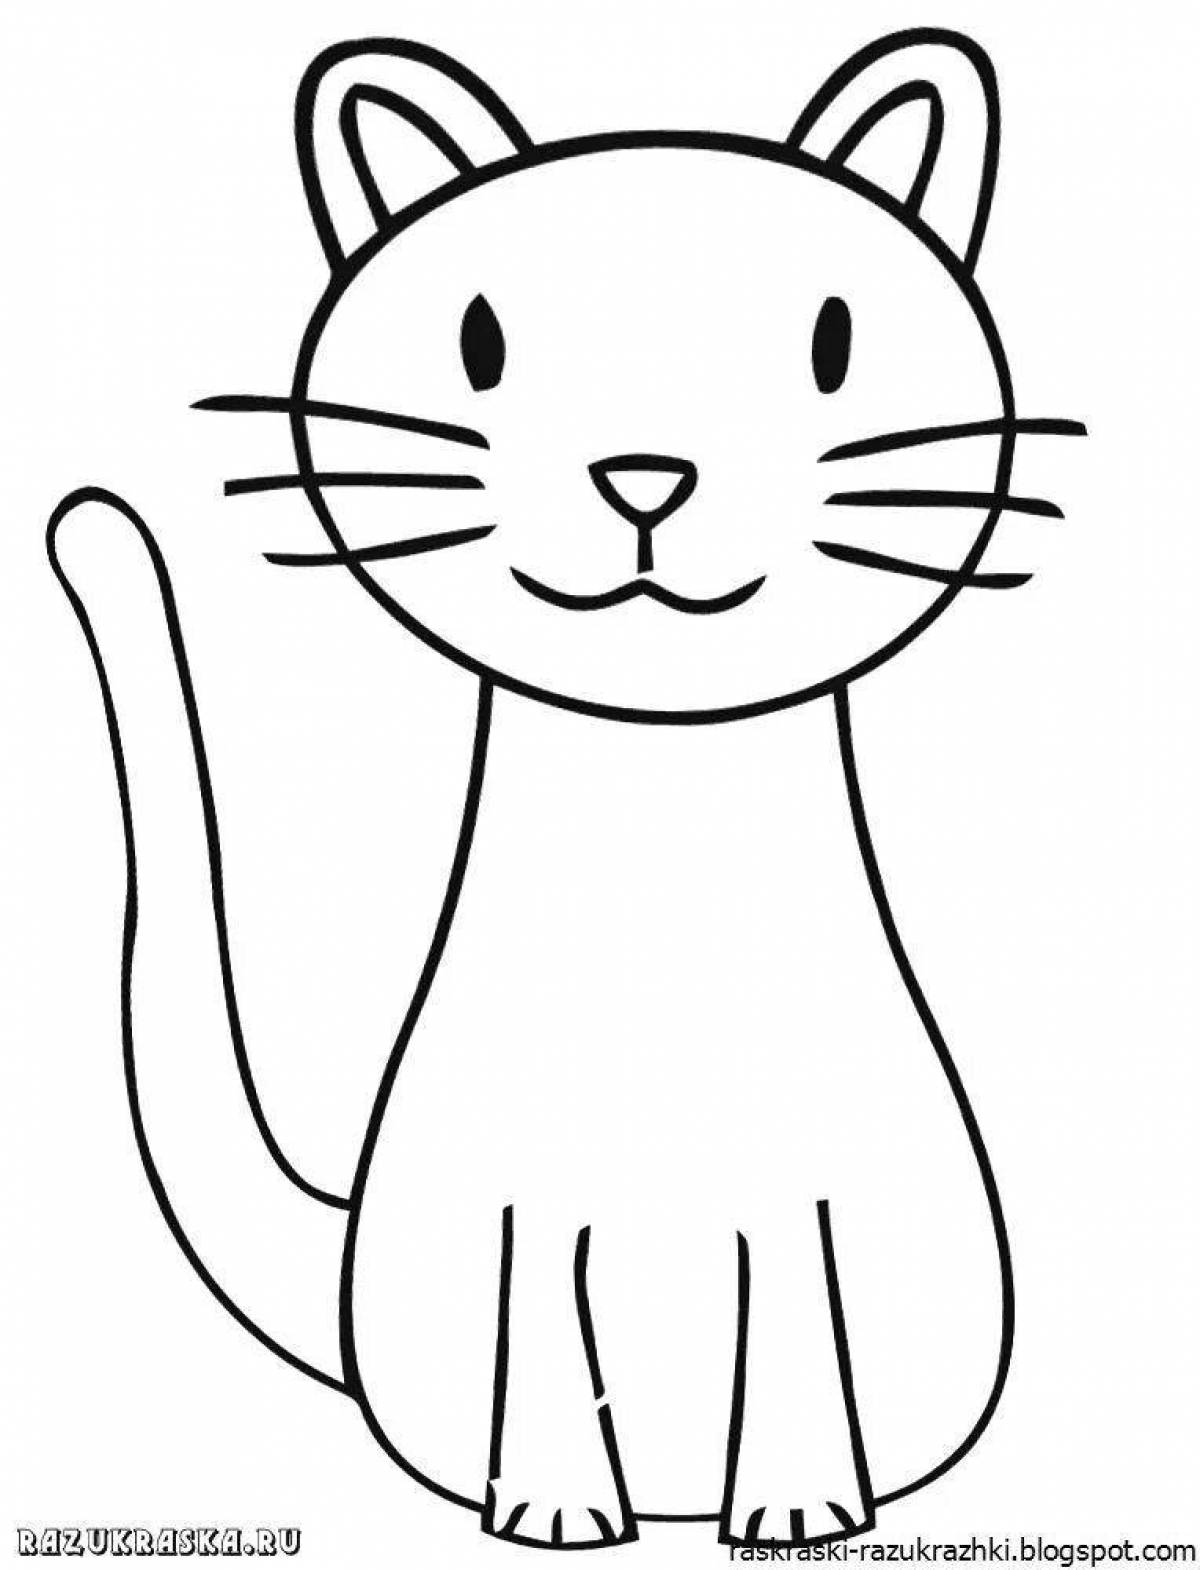 Coloring page friendly kitten for 2-3 year olds